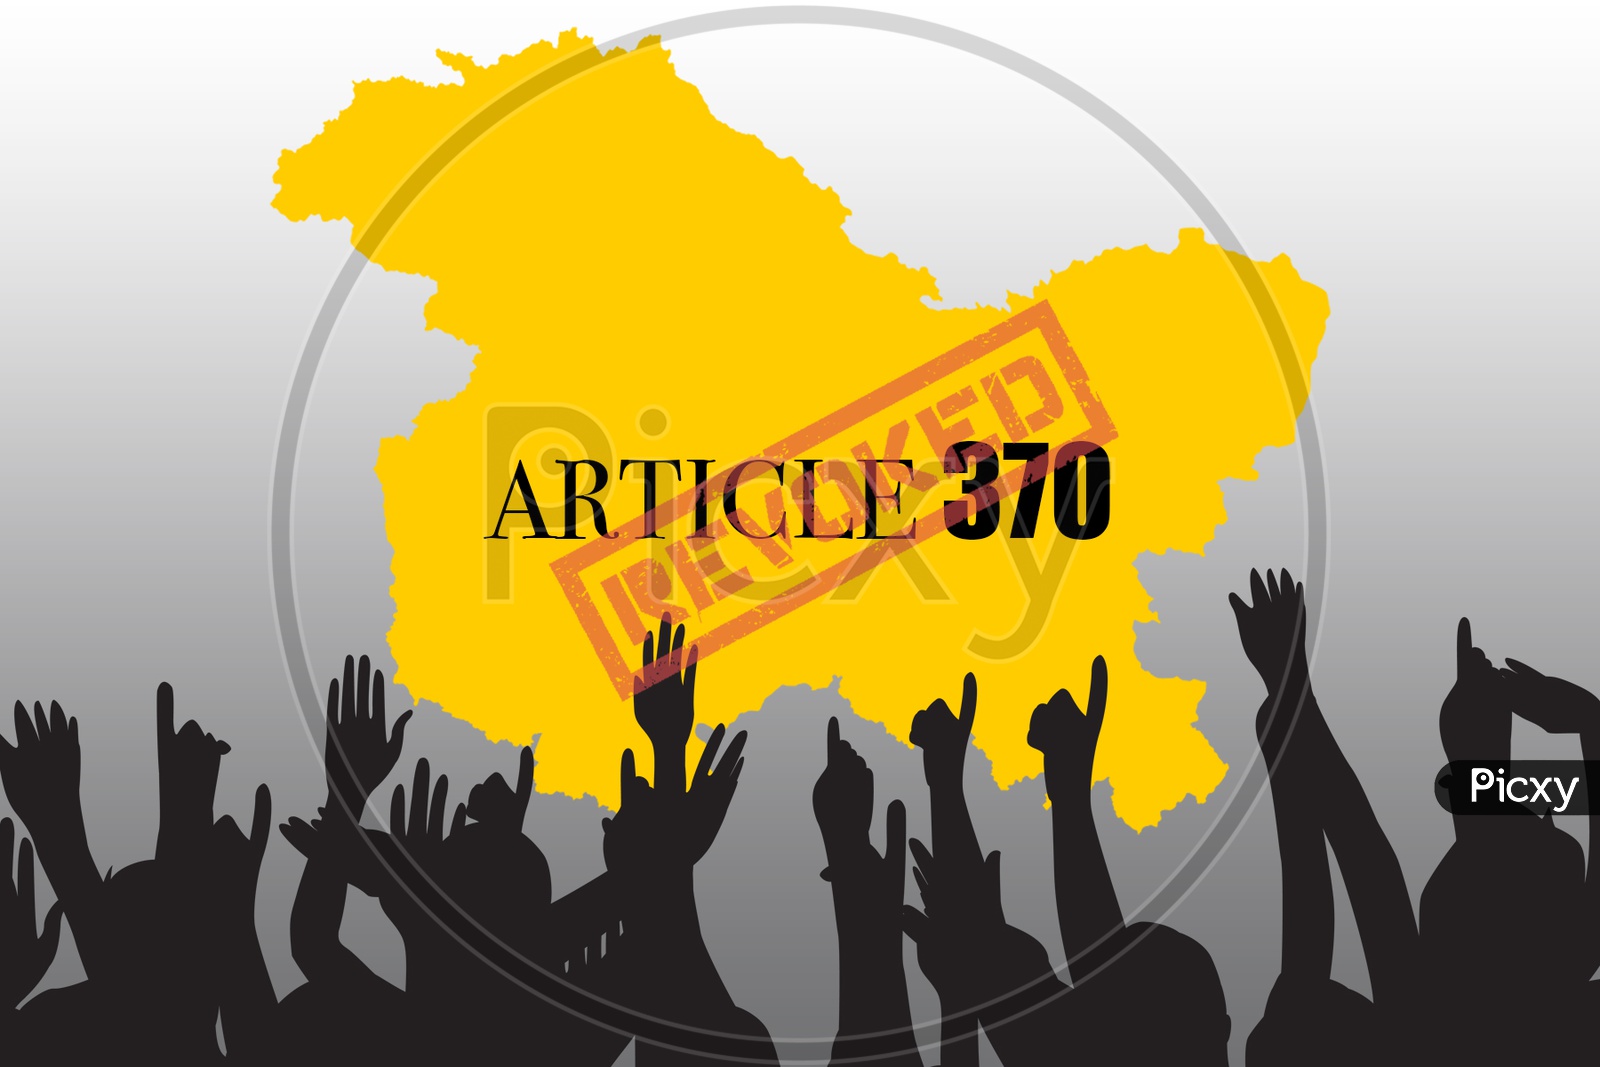 Article 370 on Jammu and Kashmir's Special Status Revoked